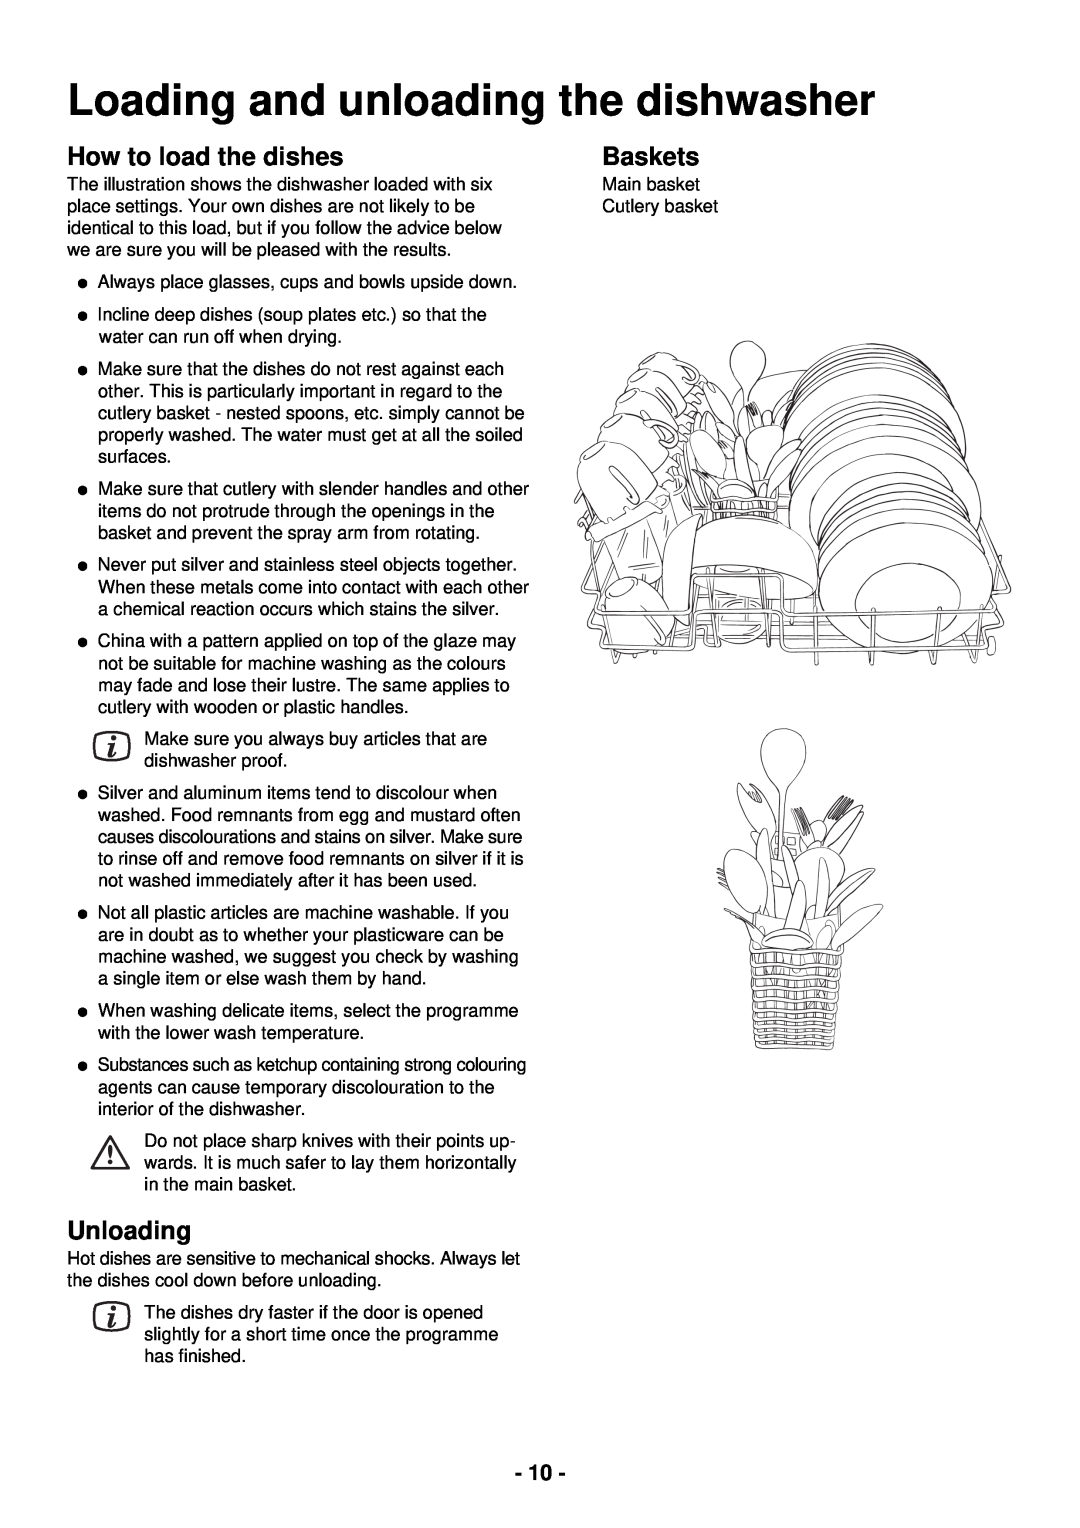 Zanussi ZDC 5465 manual Loading and unloading the dishwasher, How to load the dishes, Baskets, Unloading 